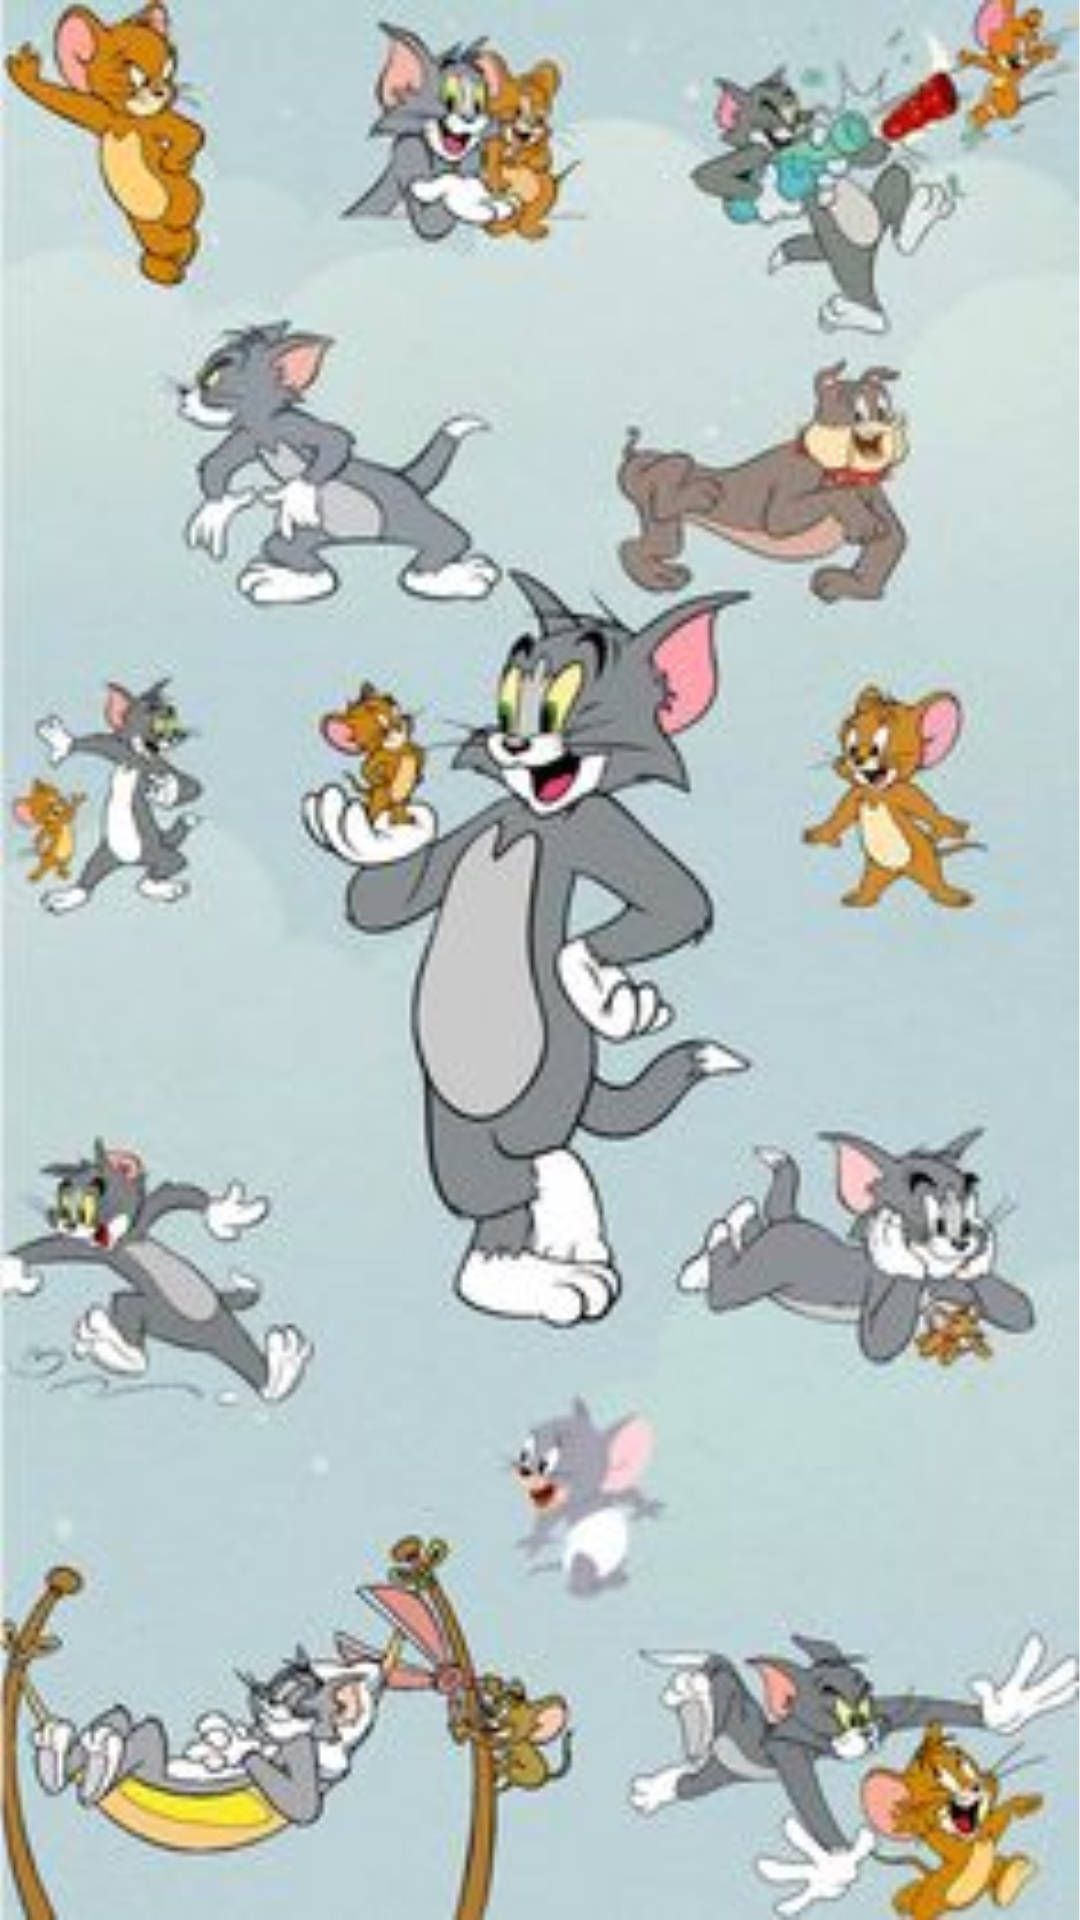 The tom and jerry cartoon characters - Tom and Jerry